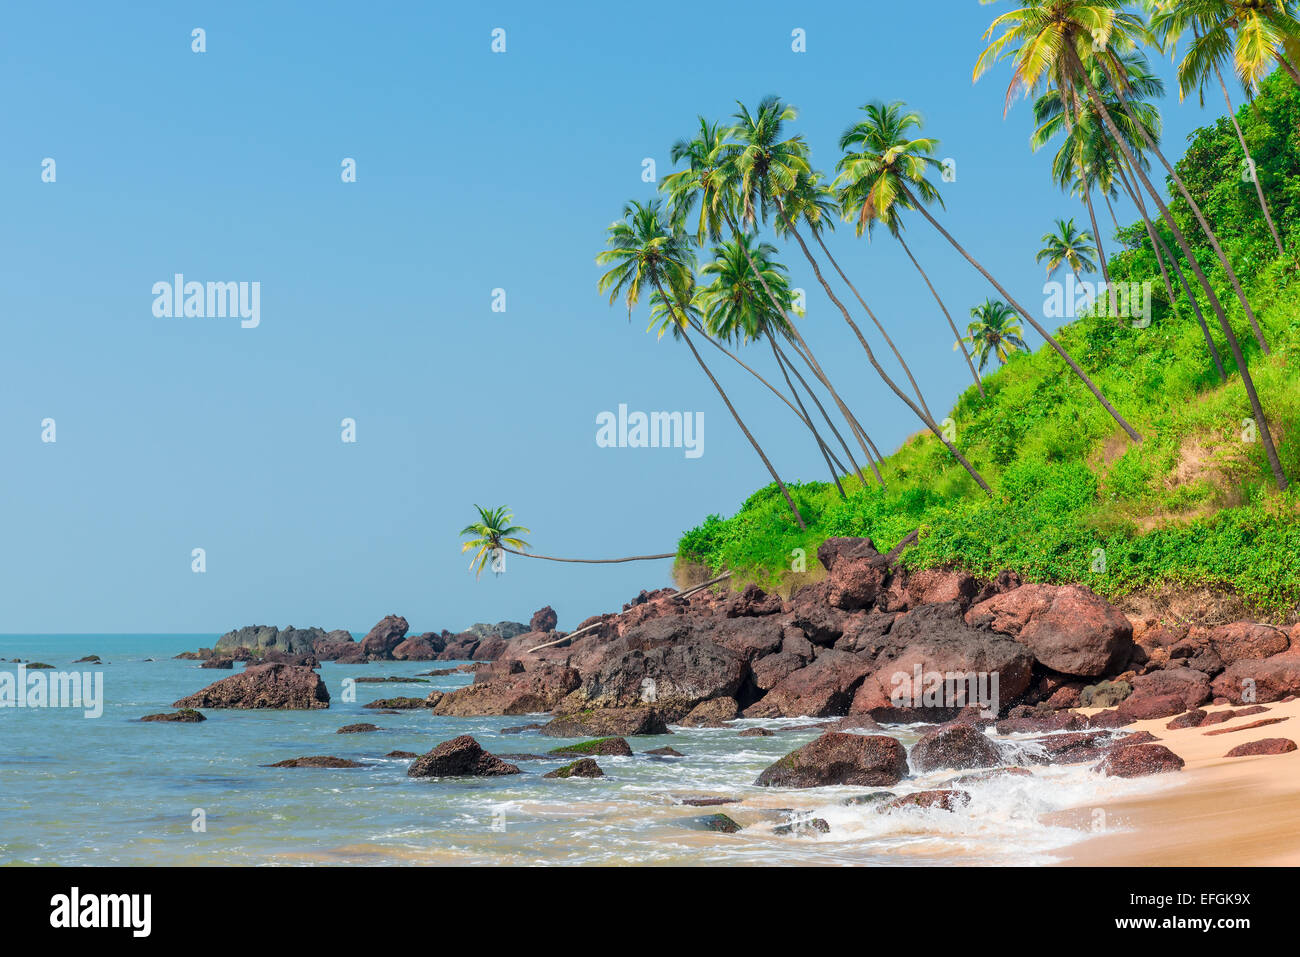 stones in the sea and palm trees on the hill Stock Photo